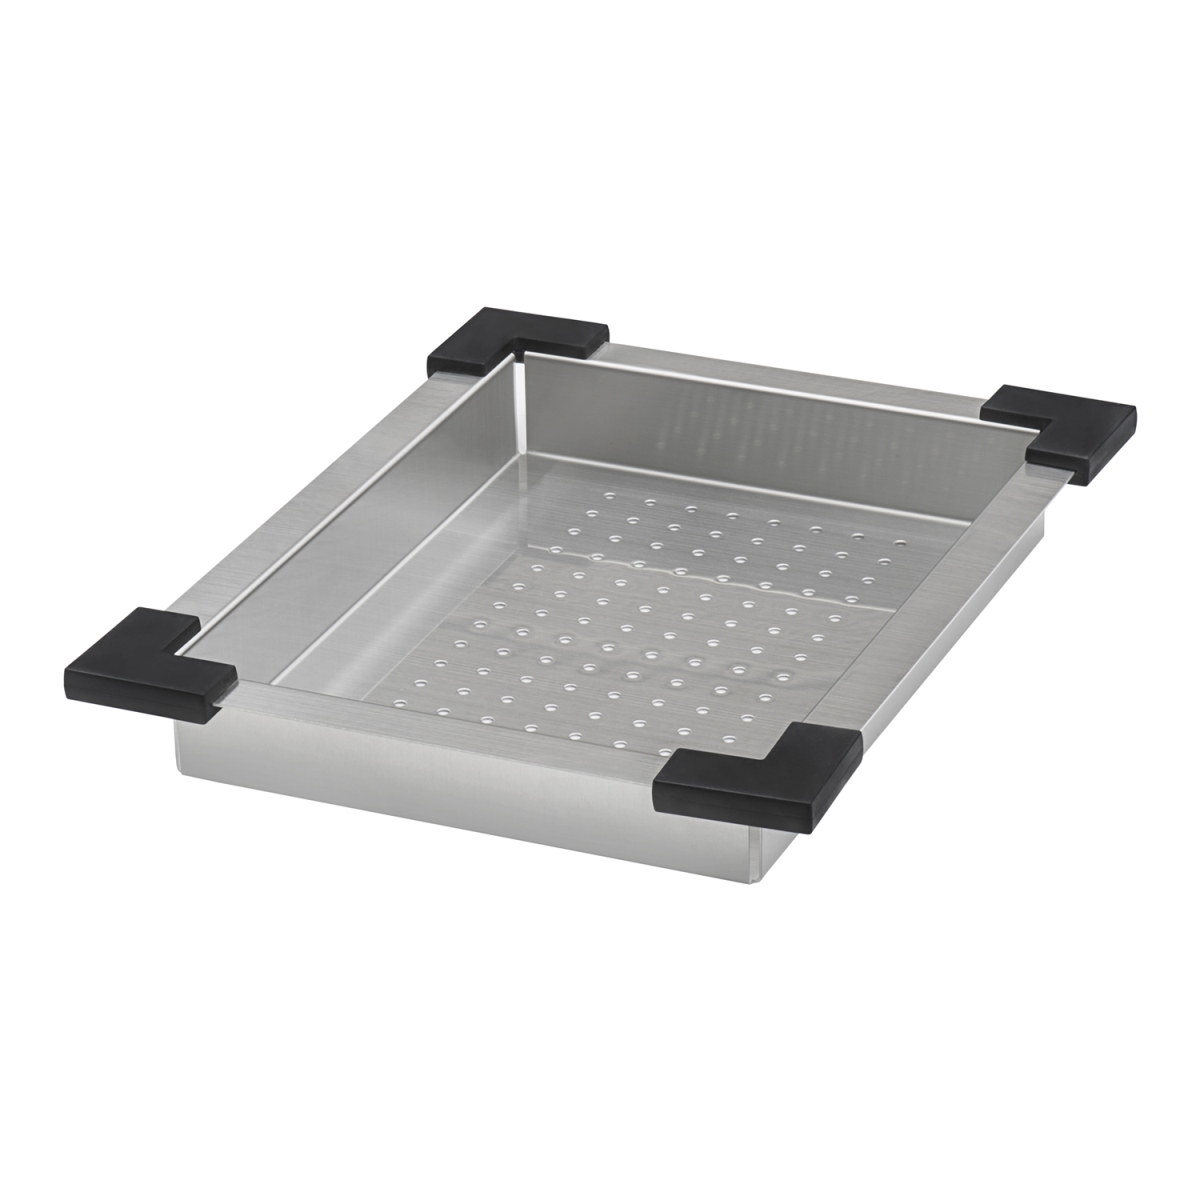 Picture of Ruvati USA RVA1322 11.5 in. Lower-Tier Shallow Colander for Double Ledge Dual Tier Workstation Sinks